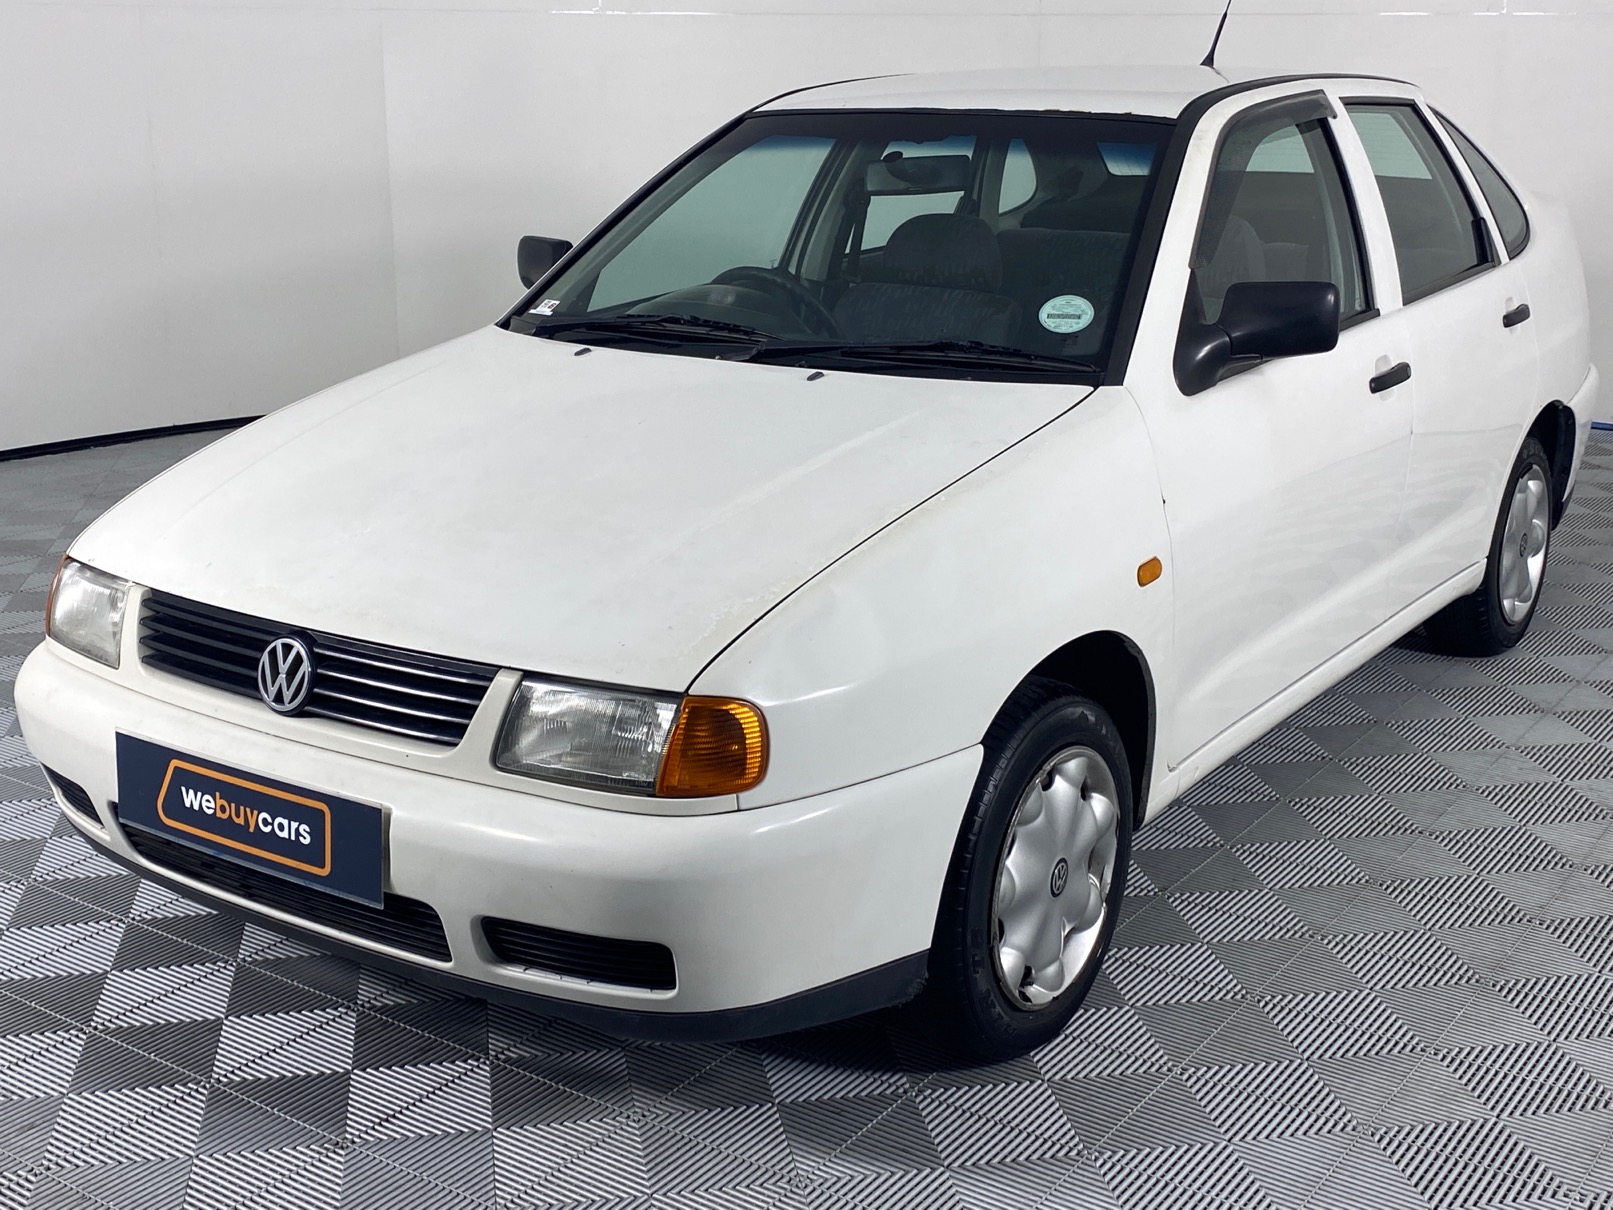 Used 2000 Volkswagen Polo Classic 1.6 for sale WeBuyCars